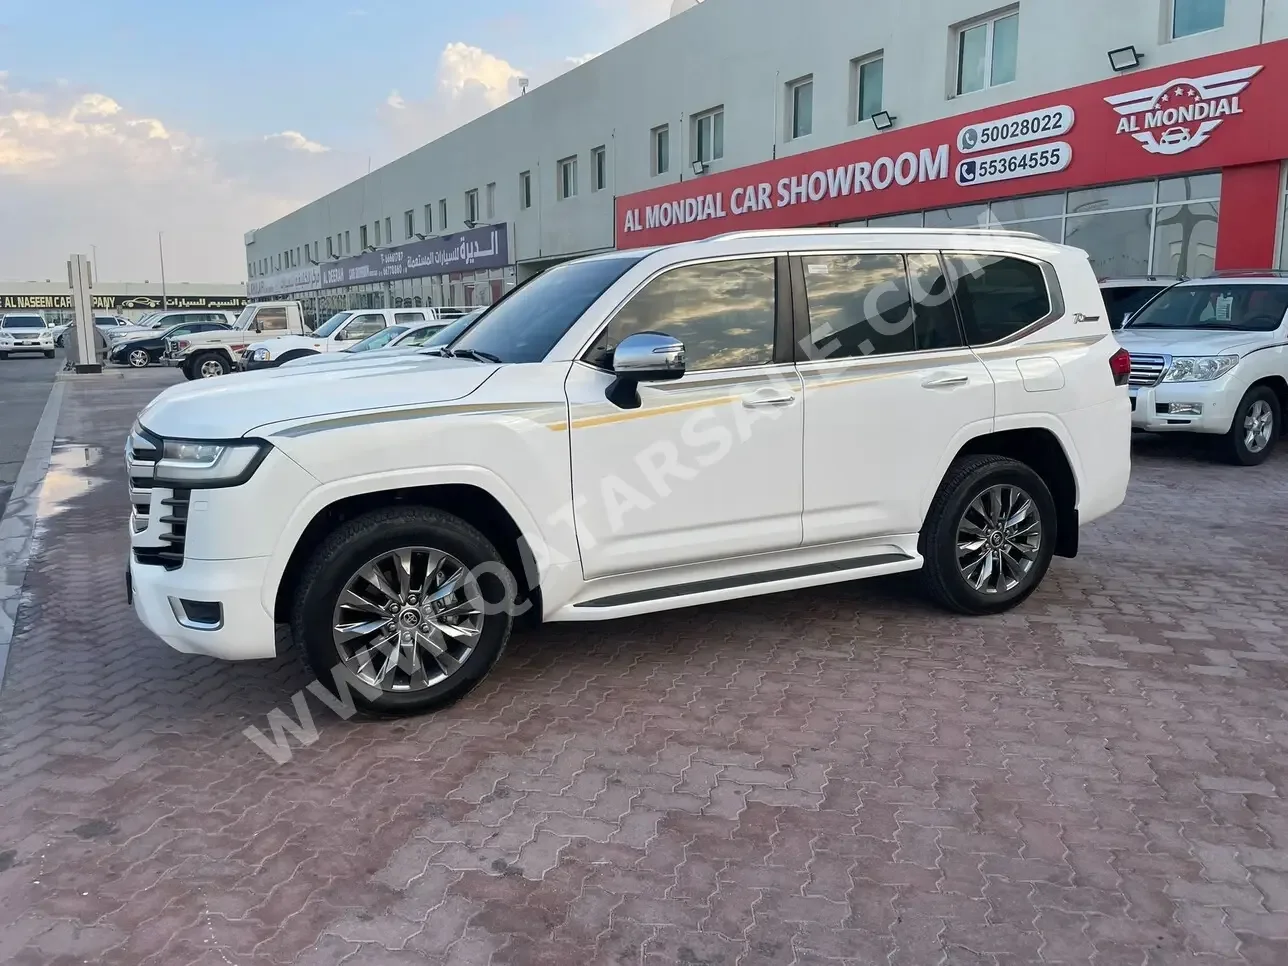 Toyota  Land Cruiser  VX Twin Turbo  2022  Automatic  85,000 Km  6 Cylinder  Four Wheel Drive (4WD)  SUV  White  With Warranty